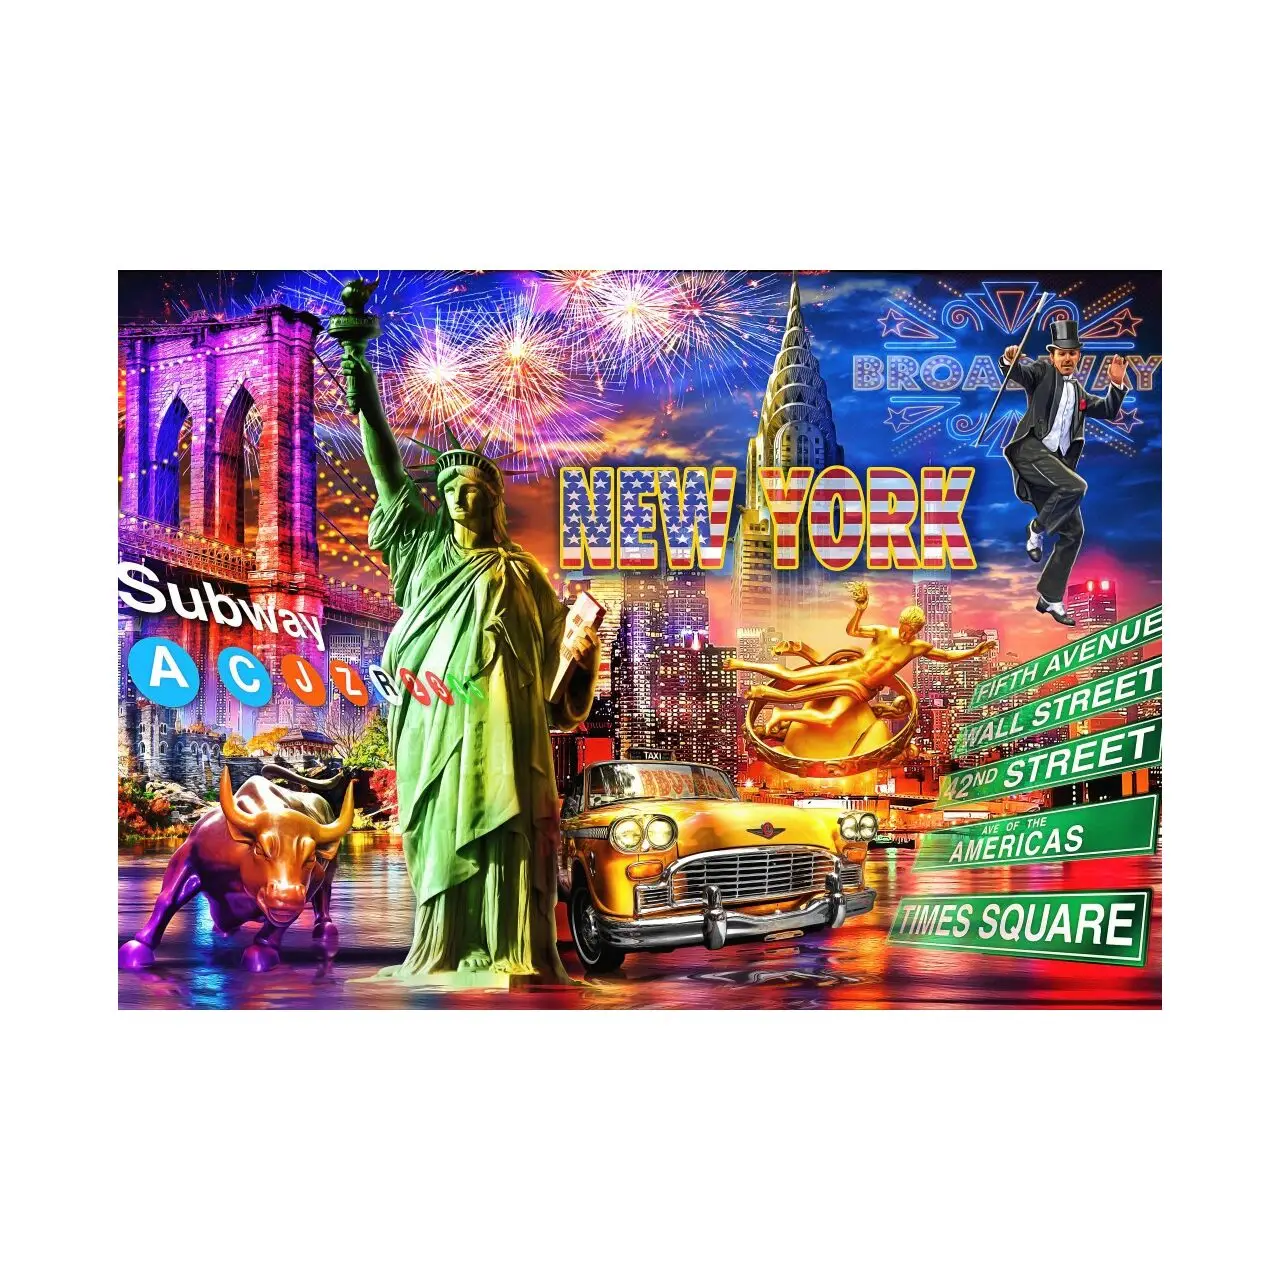 Puzzle New York Teile 3000